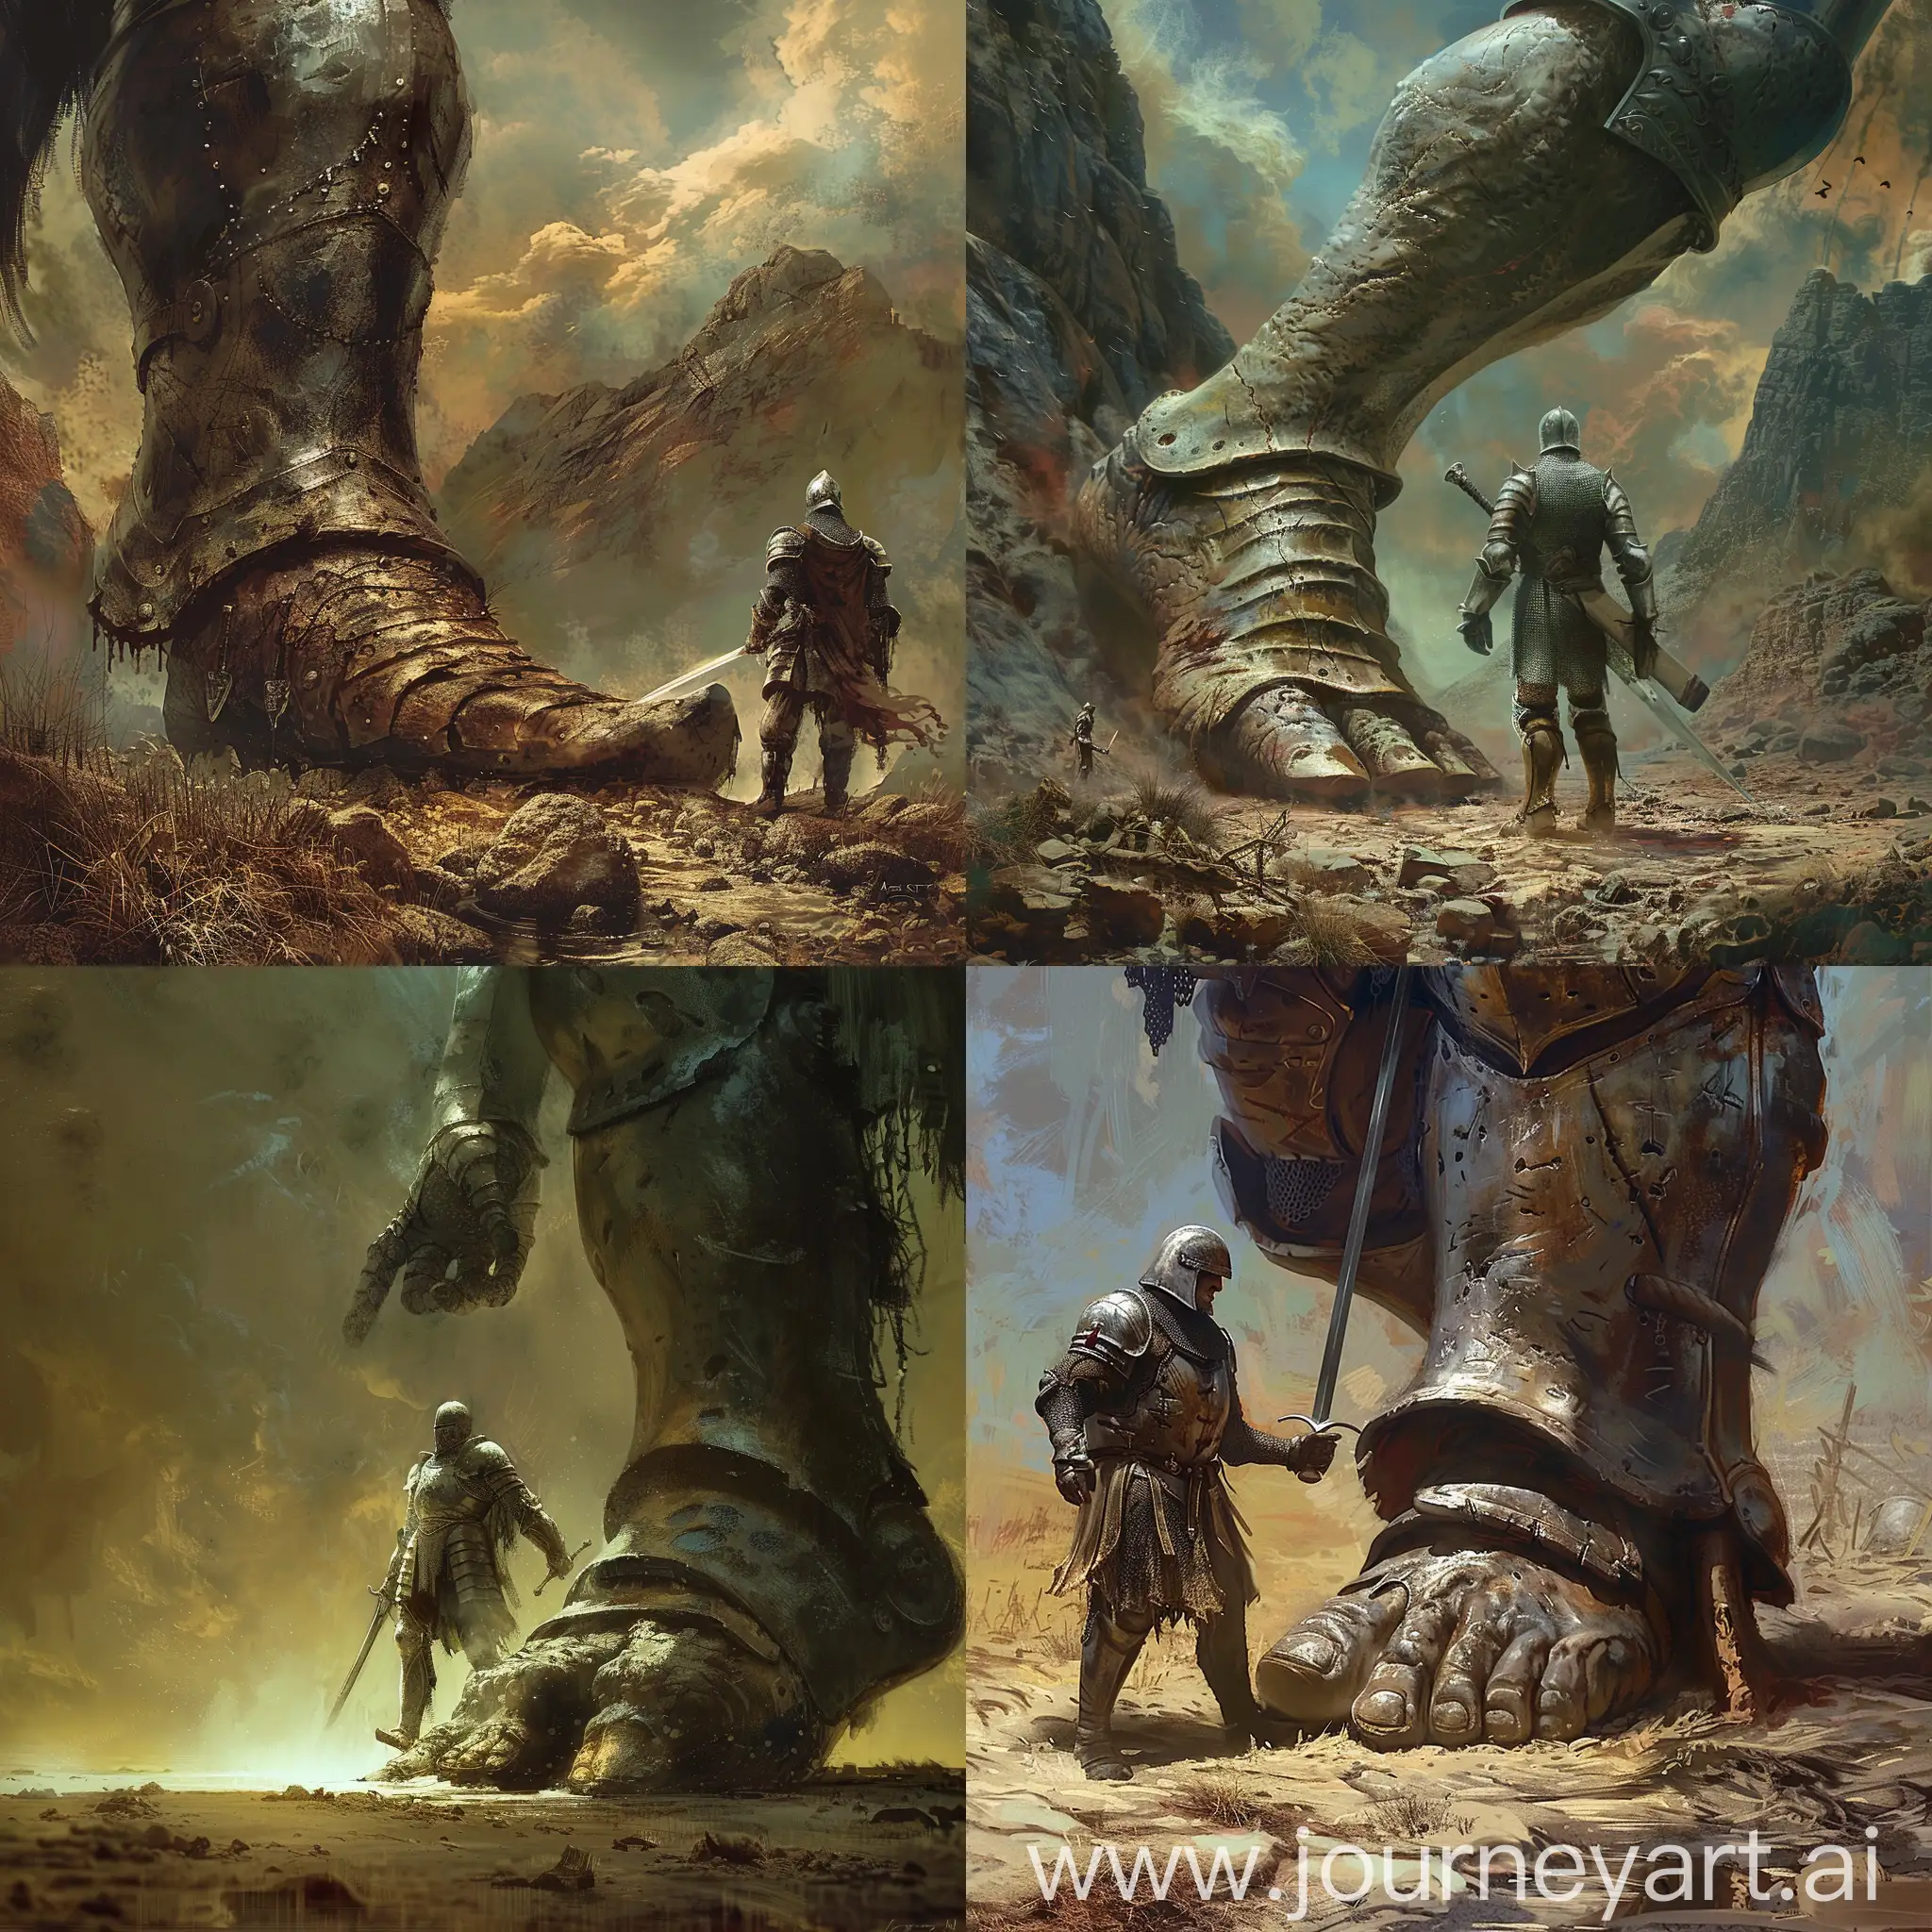 Fantasy arwork of a knight held back a giant foot that was about to step on him